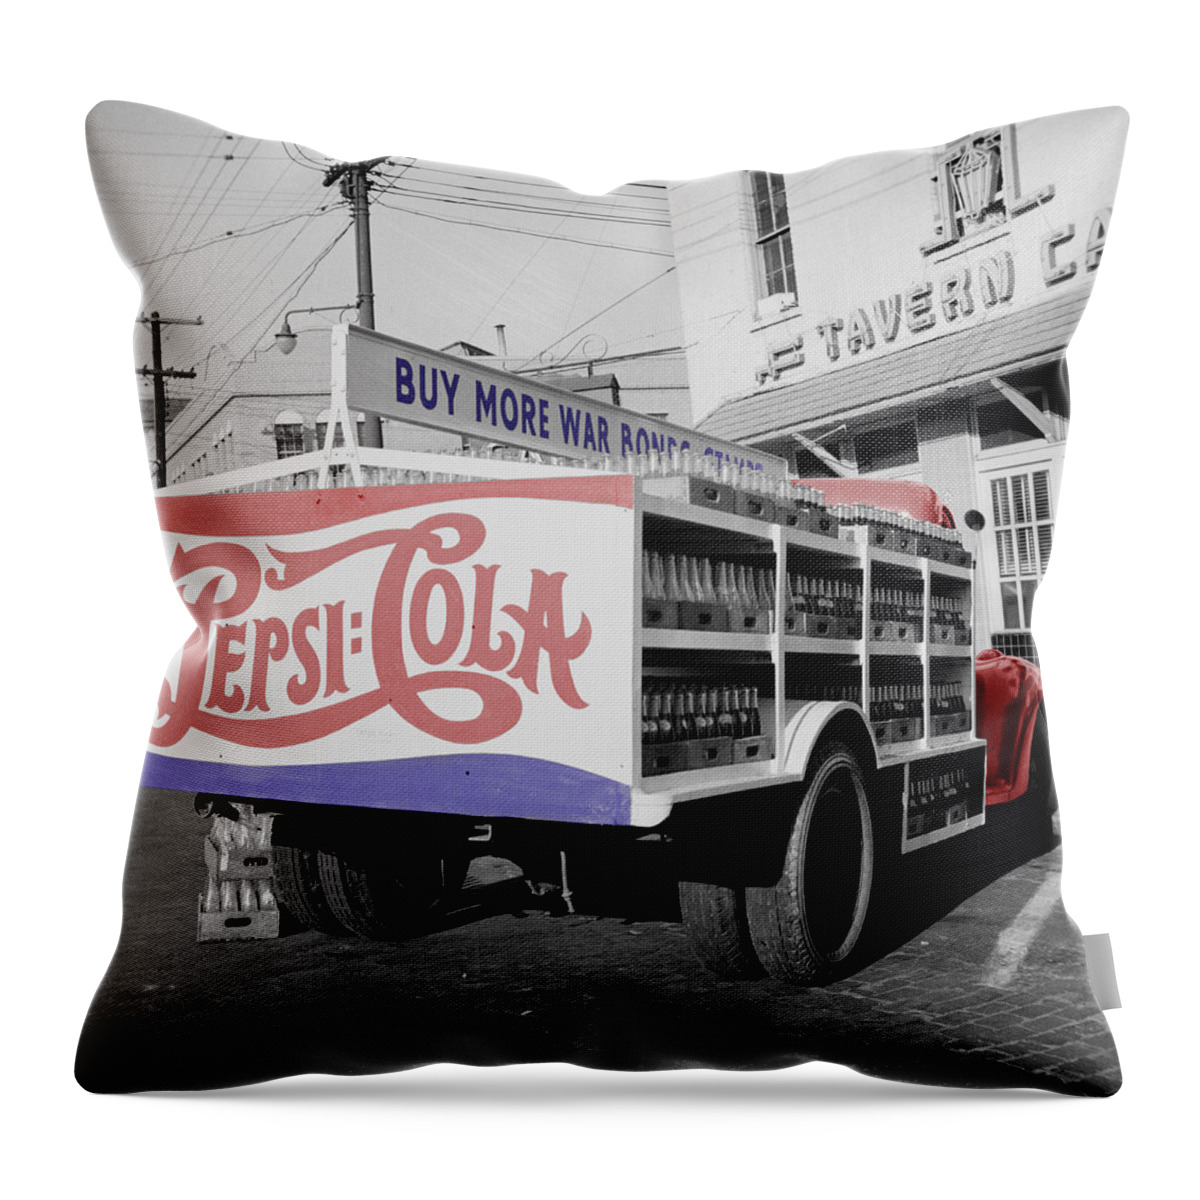 Pepsi Throw Pillow featuring the photograph Vintage Pepsi Truck by Andrew Fare